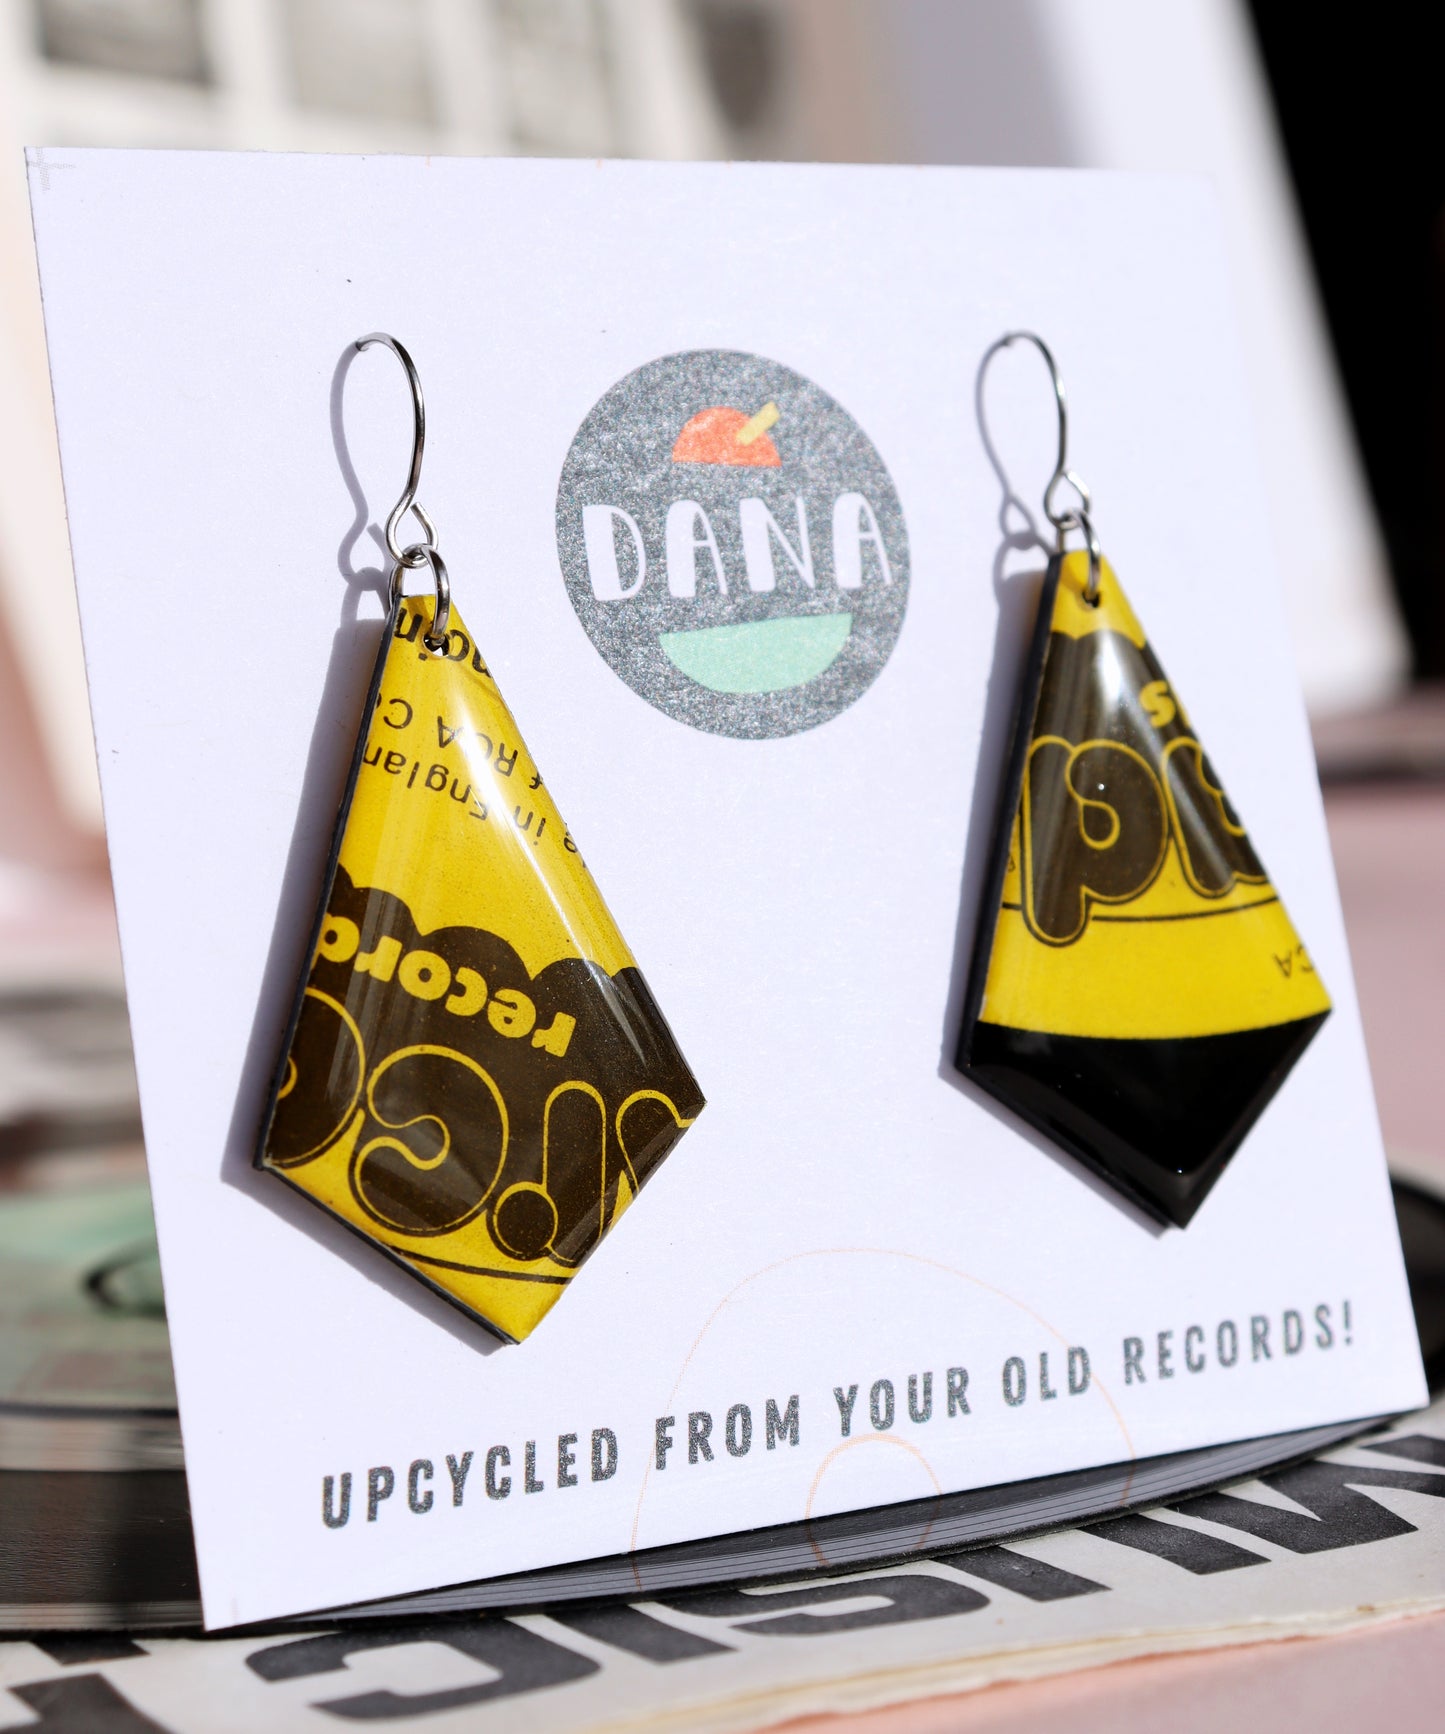 Bright Yellow Geometric Upcycled Vinyl Record Earrings - Handcrafted Statement Earrings